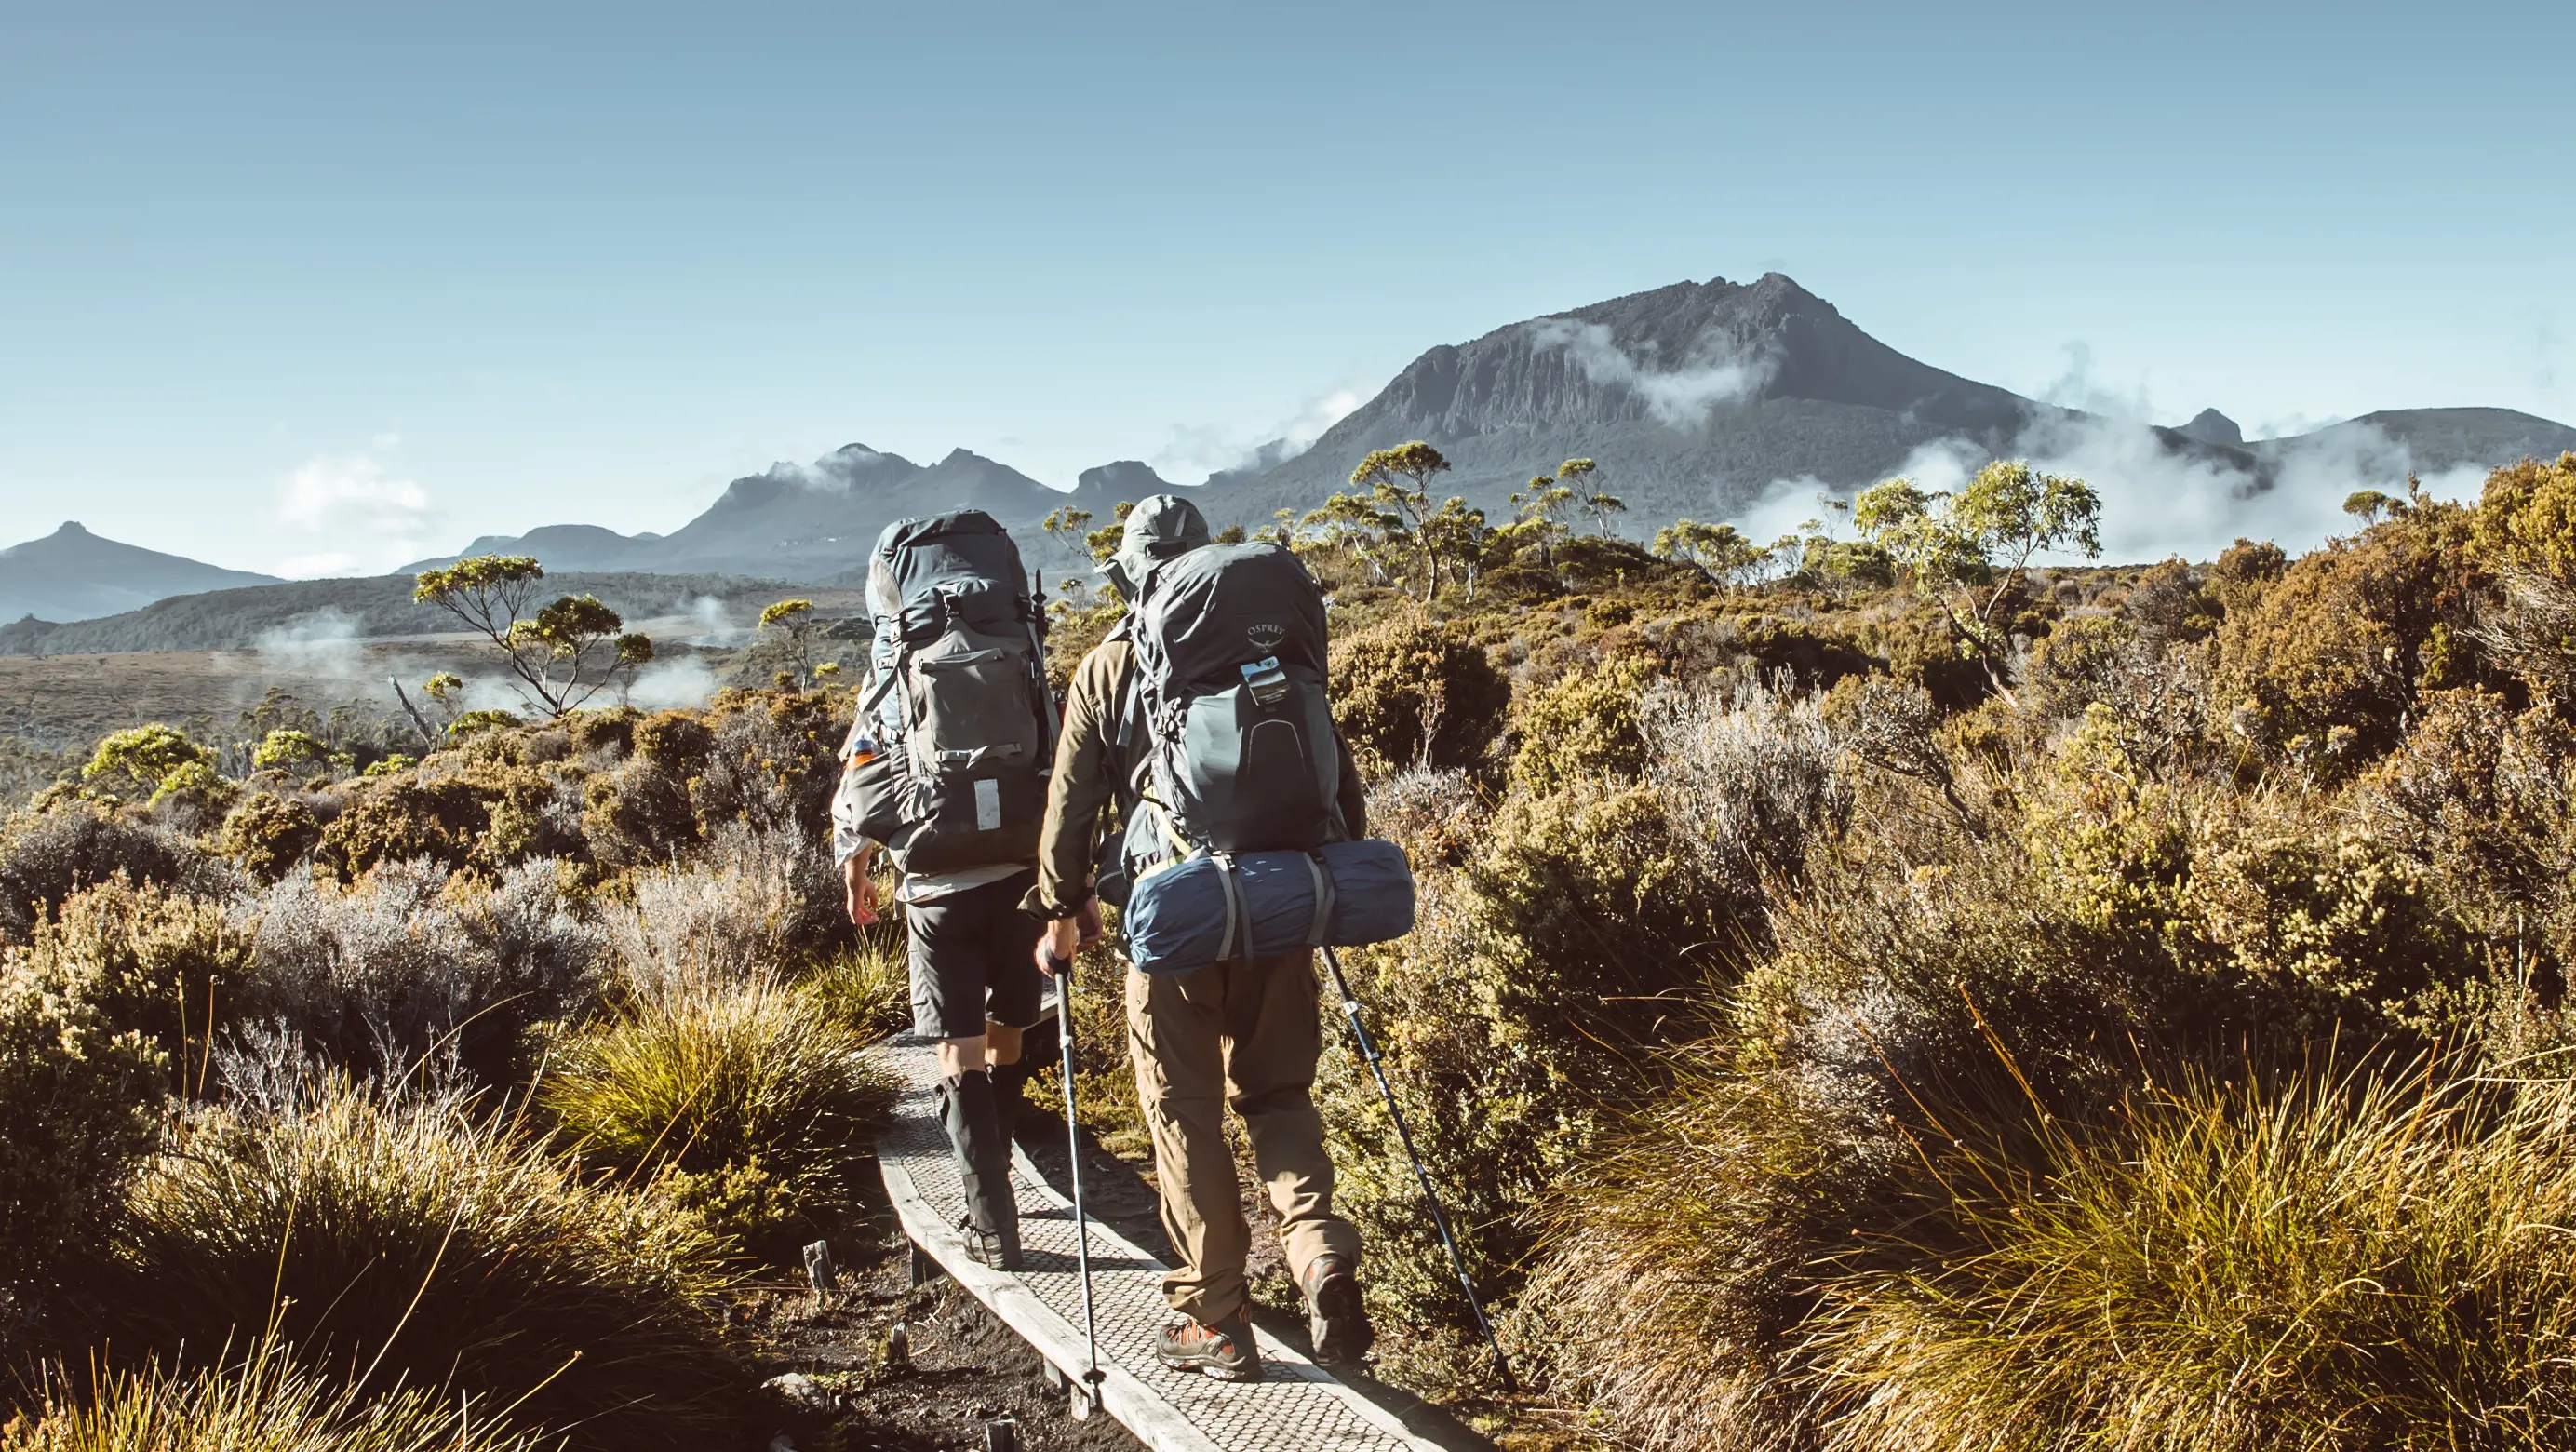 "Hikers walking the Overland Track at Cradle Mountain, Lake St Clair National Park "